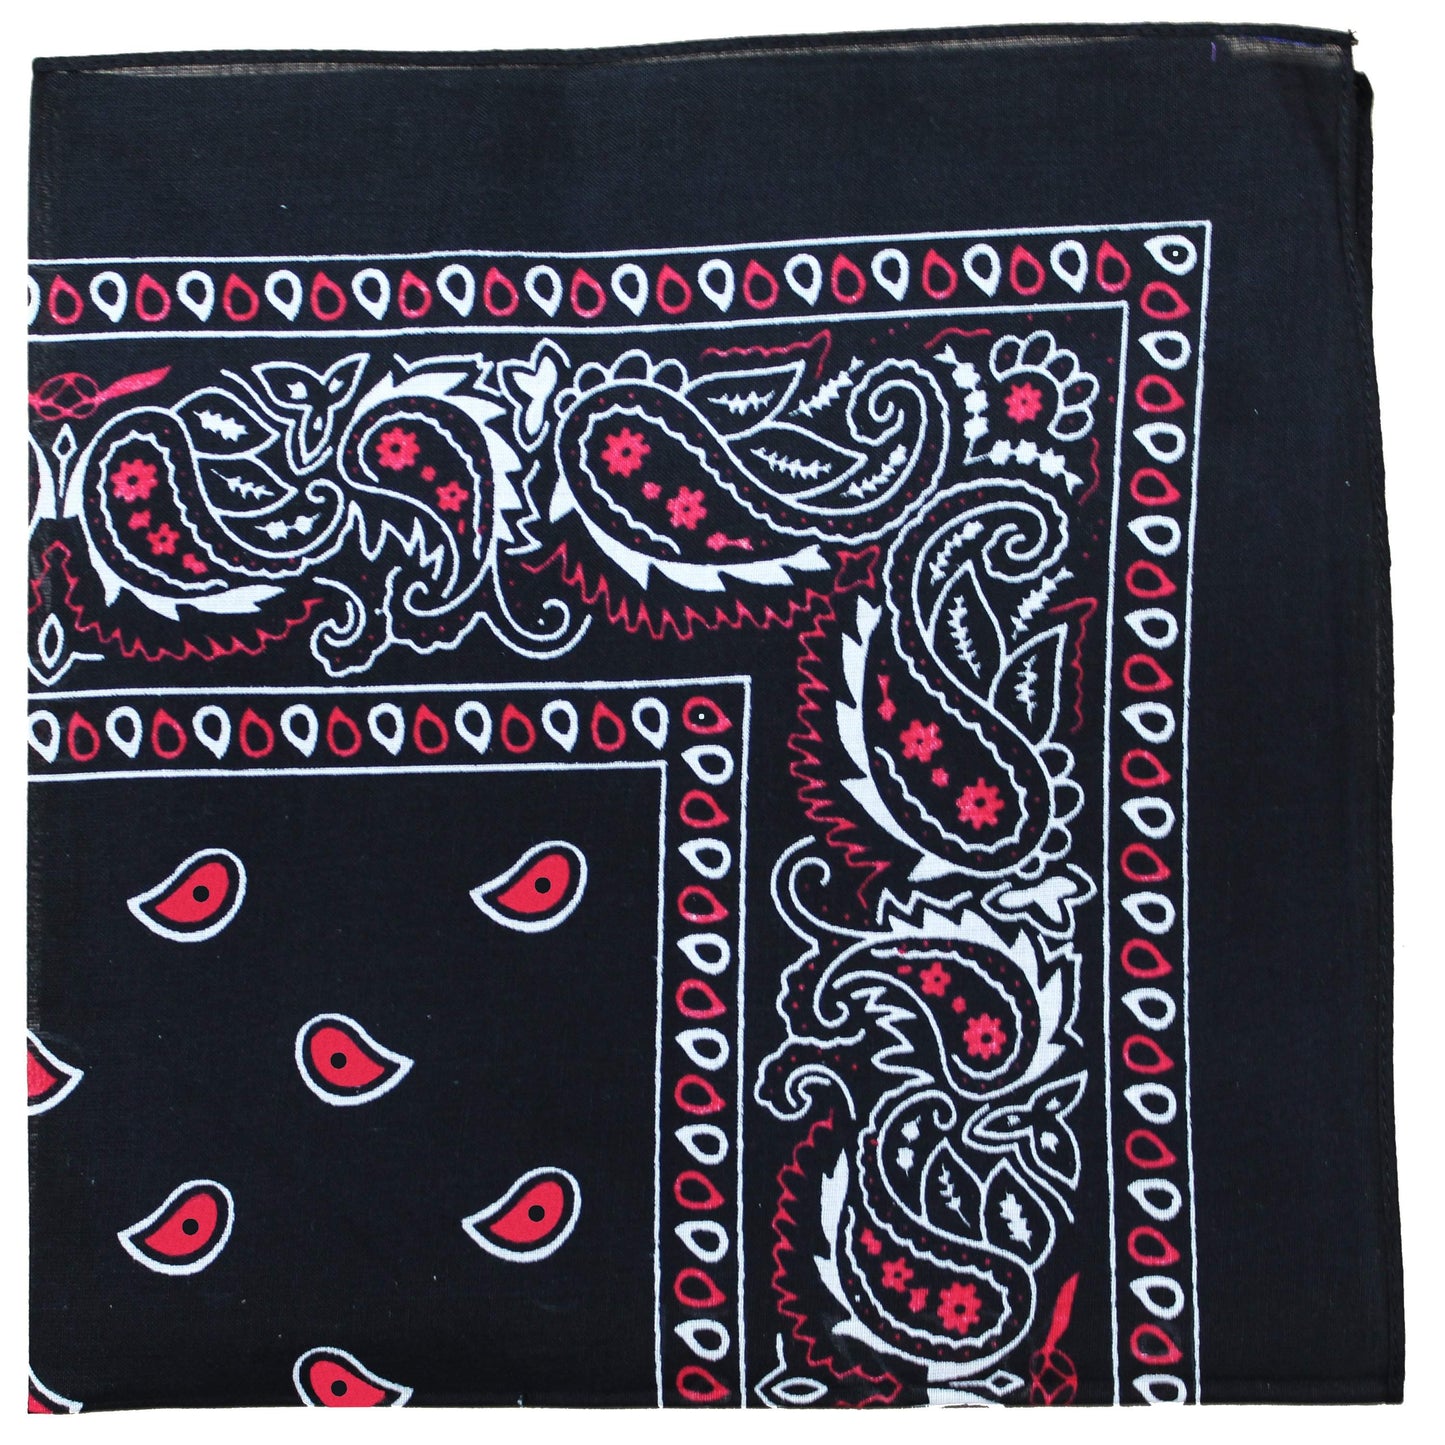 Mechaly Pack of 18 Cotton X-Large Paisley and Plain Printed Bandana